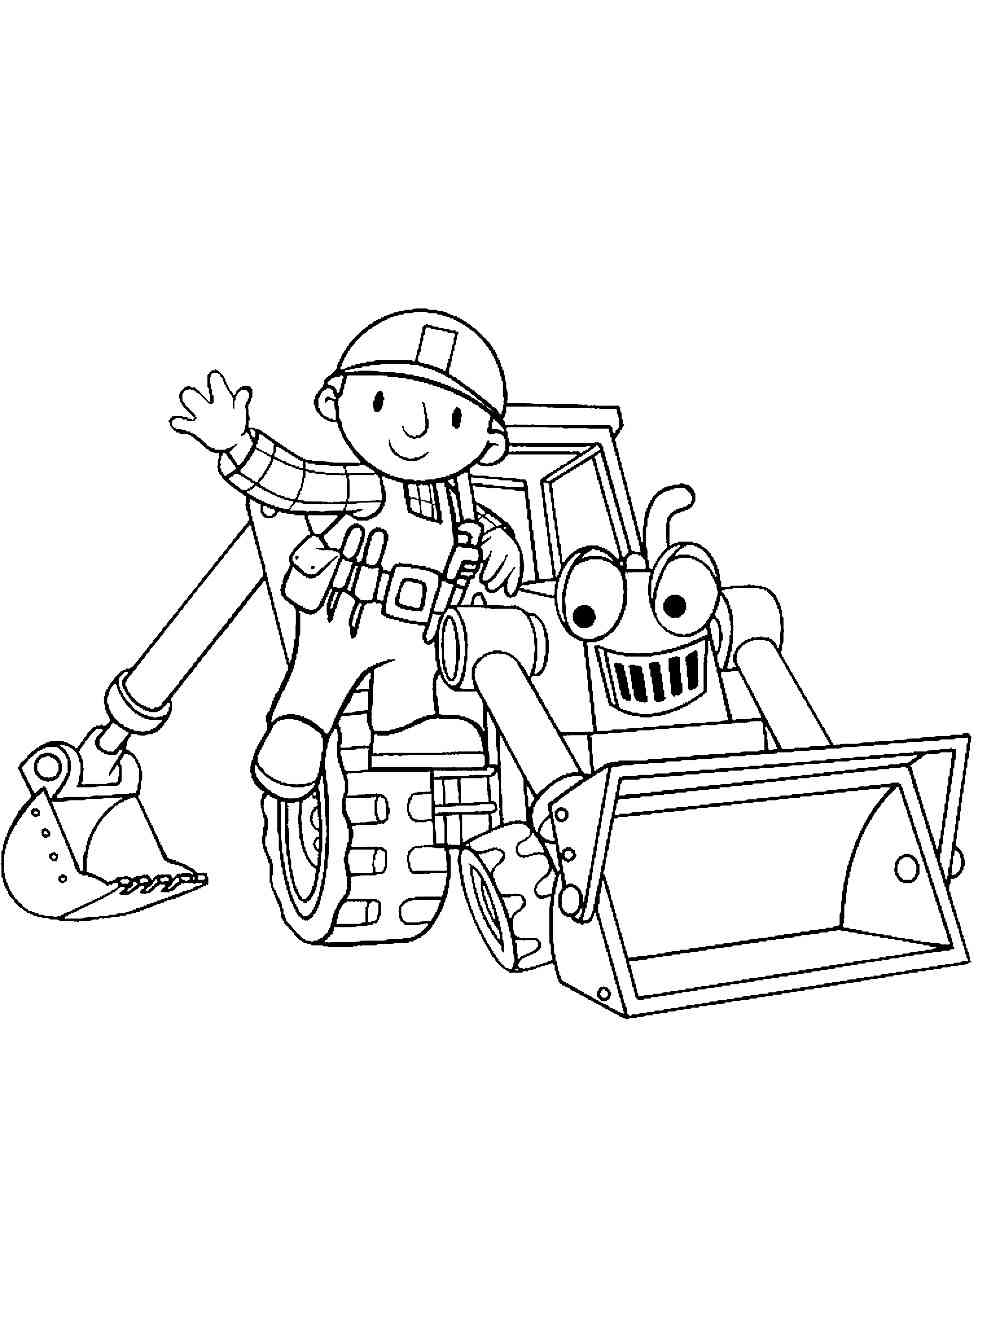 Bob The Builder 58 coloring page